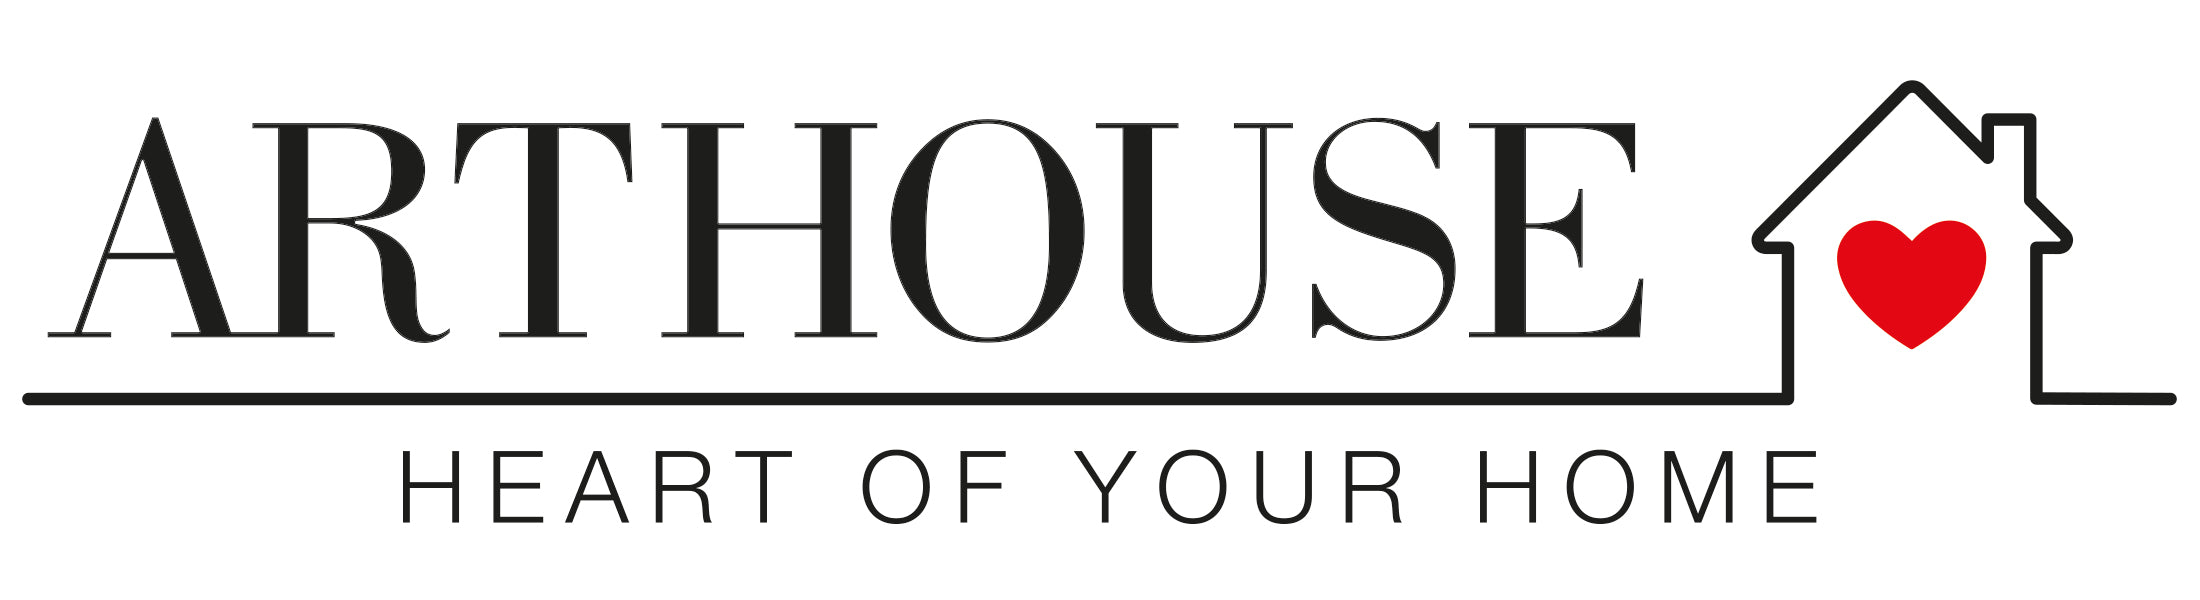 10% Off With Arthouse Coupon Code